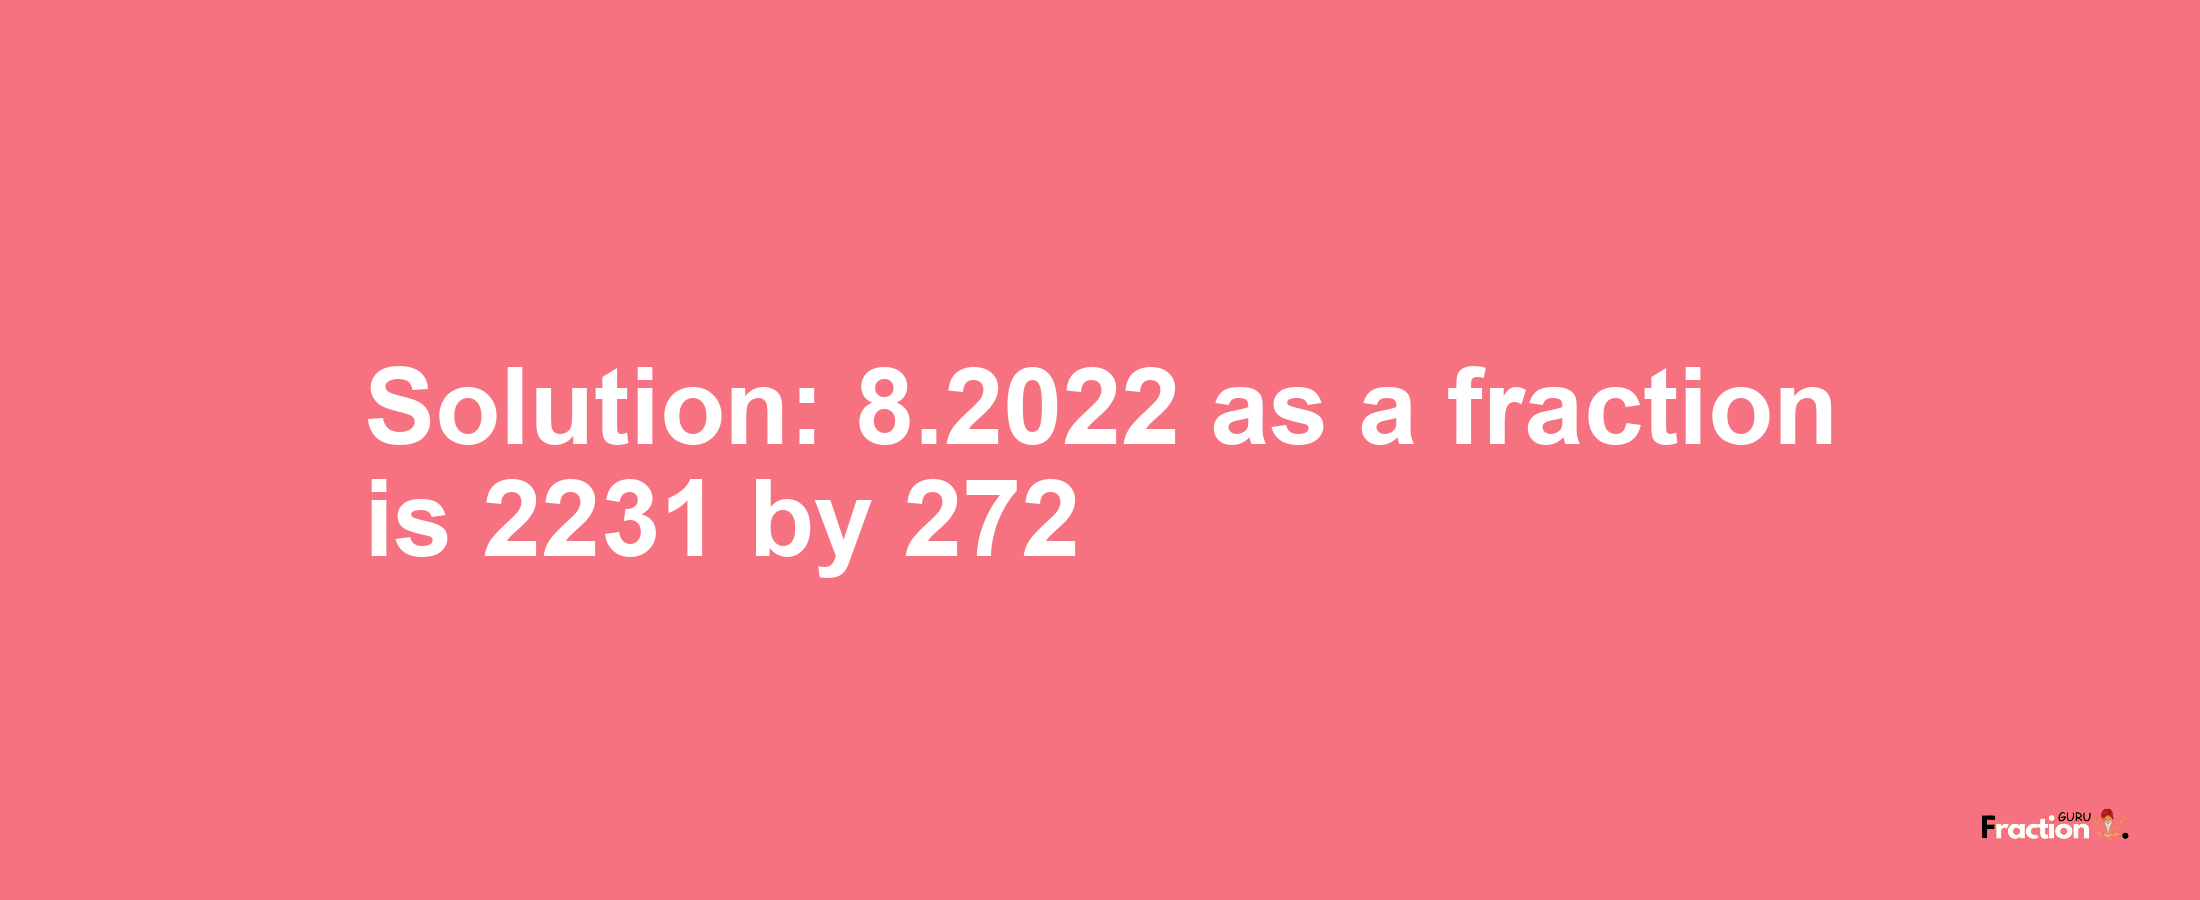 Solution:8.2022 as a fraction is 2231/272